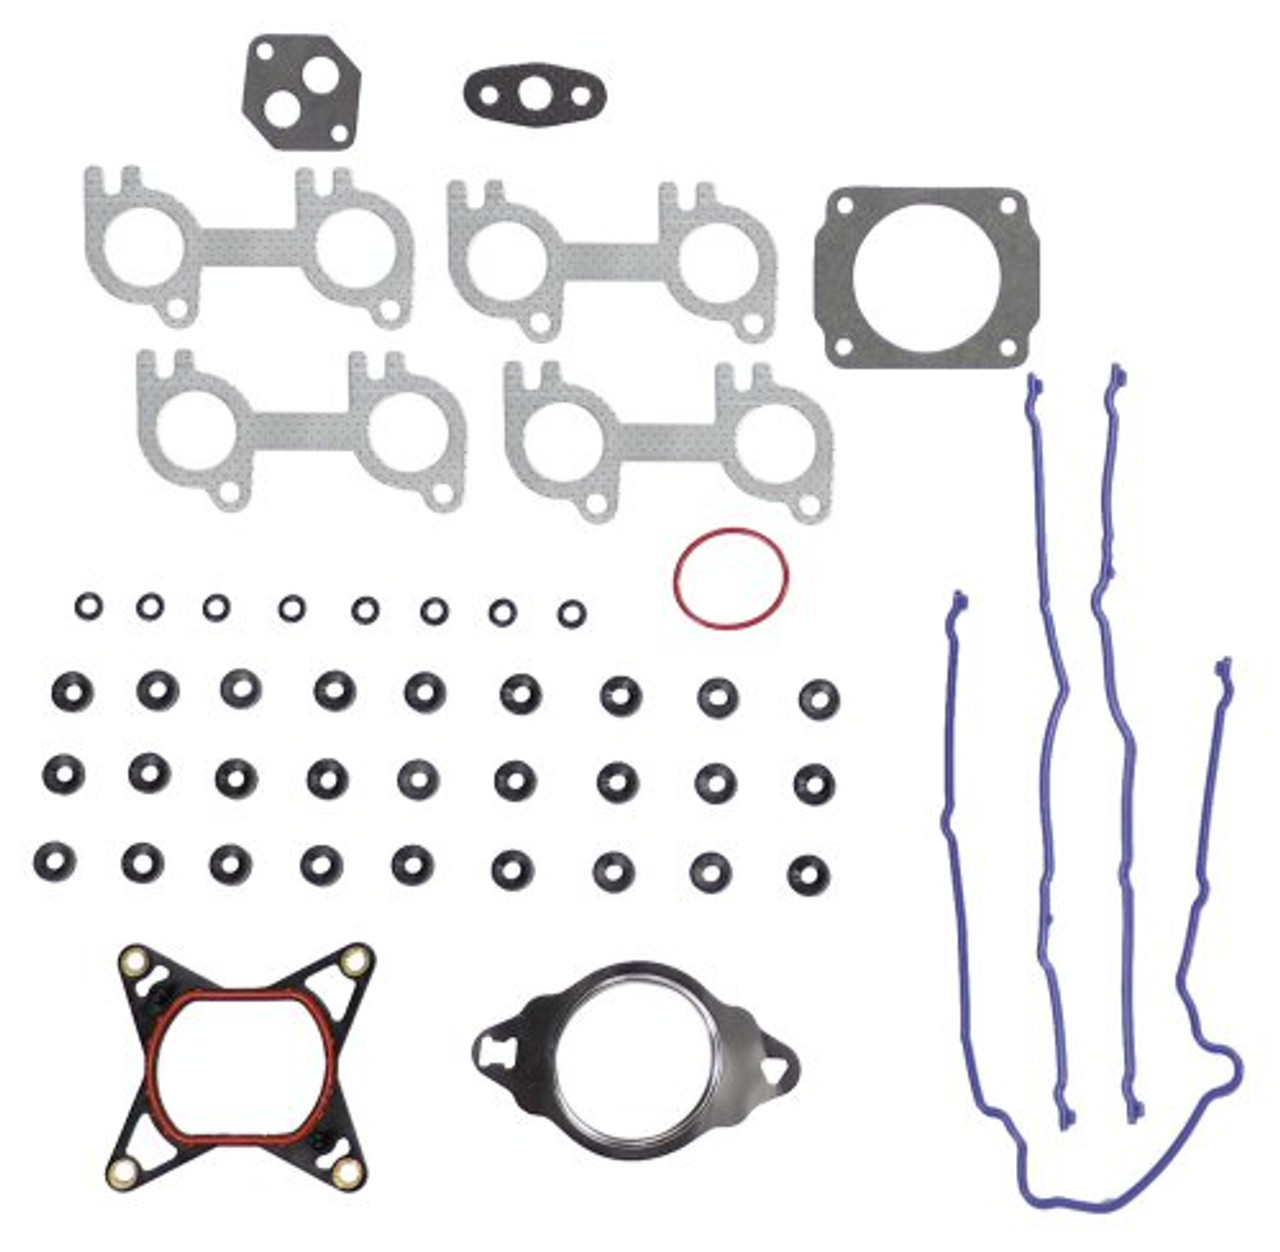 Head Gasket Set - 1998 Ford Mustang 4.6L Engine Parts # HGS4147ZE4